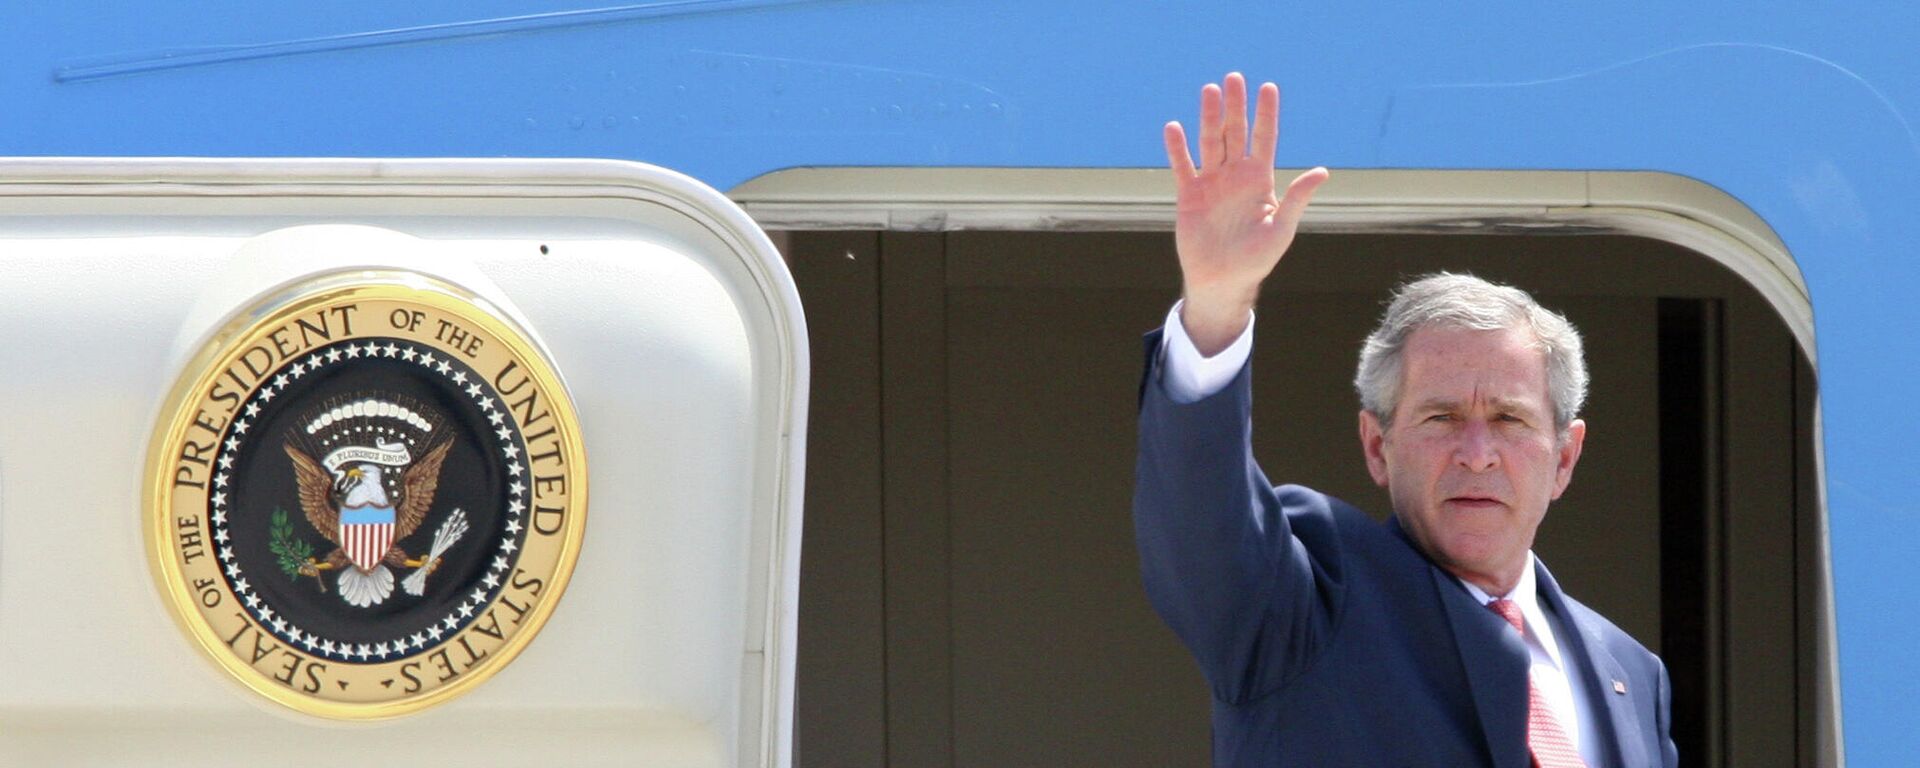 U.S. President George W. Bush waves as he boards the Air Force One presidential plane in the airport of Merida, Mexico, Wednesday, March 14, 2007 - Sputnik International, 1920, 30.12.2021